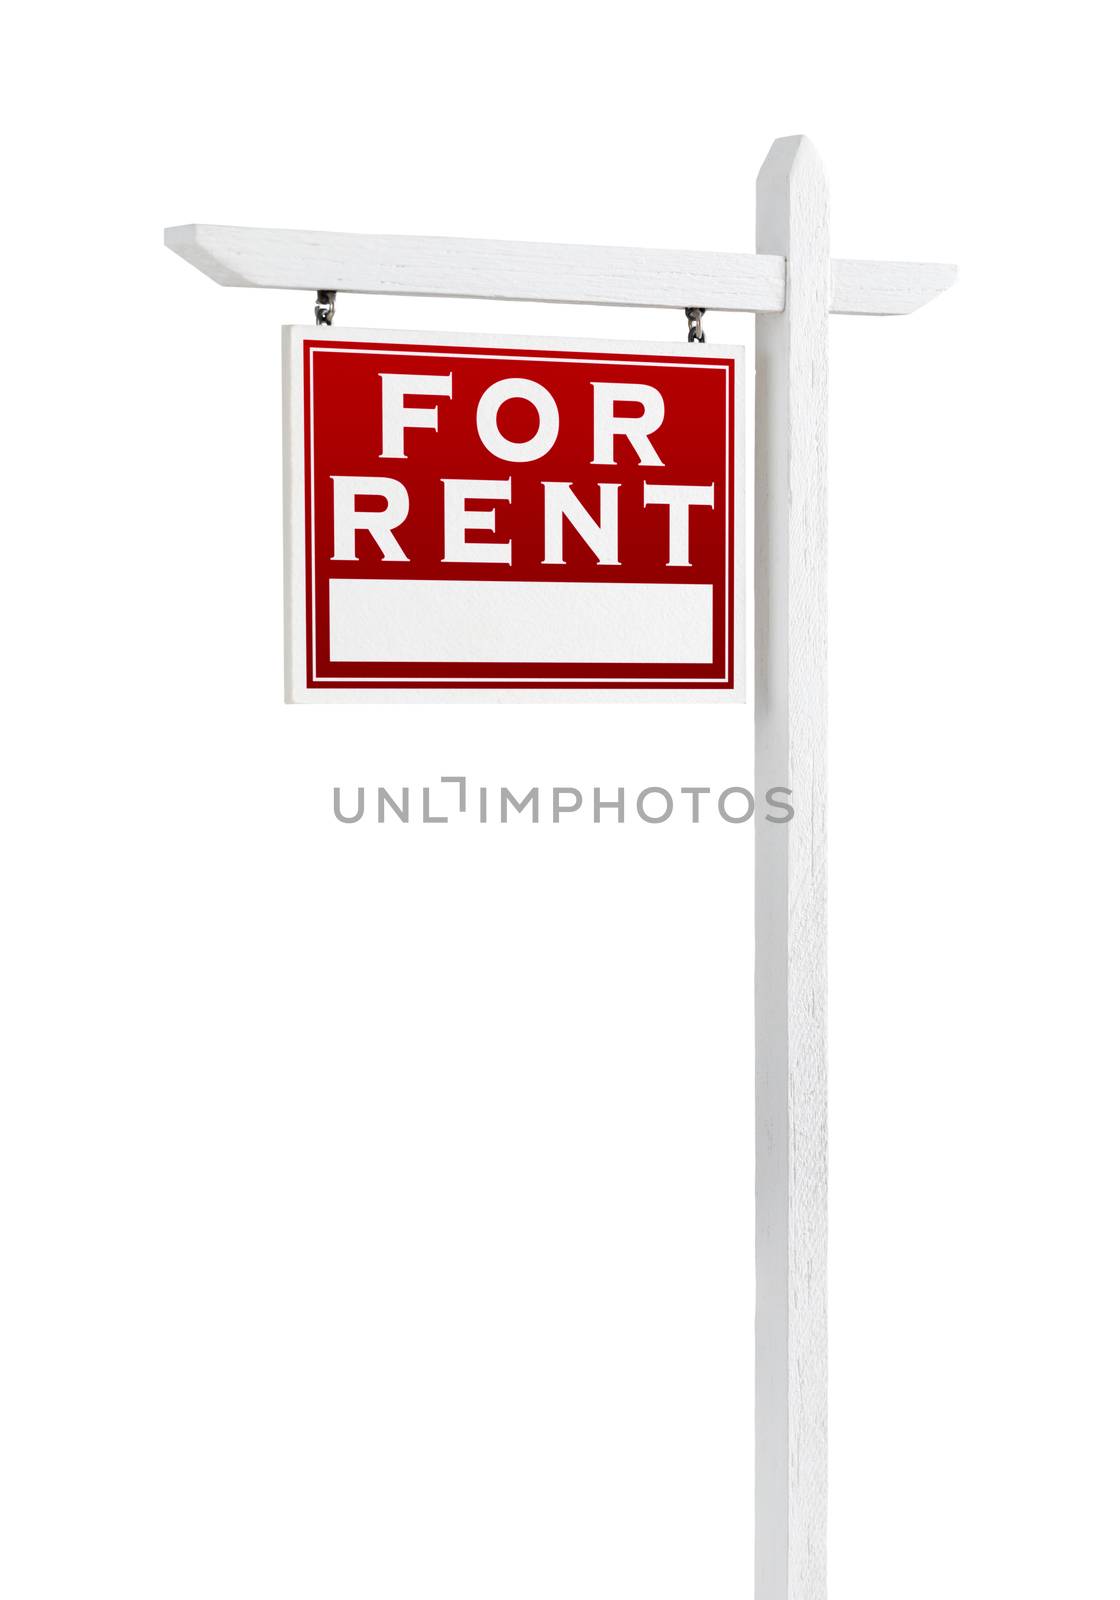 Left Facing For Rent Real Estate Sign Isolated on a White Backgo by Feverpitched